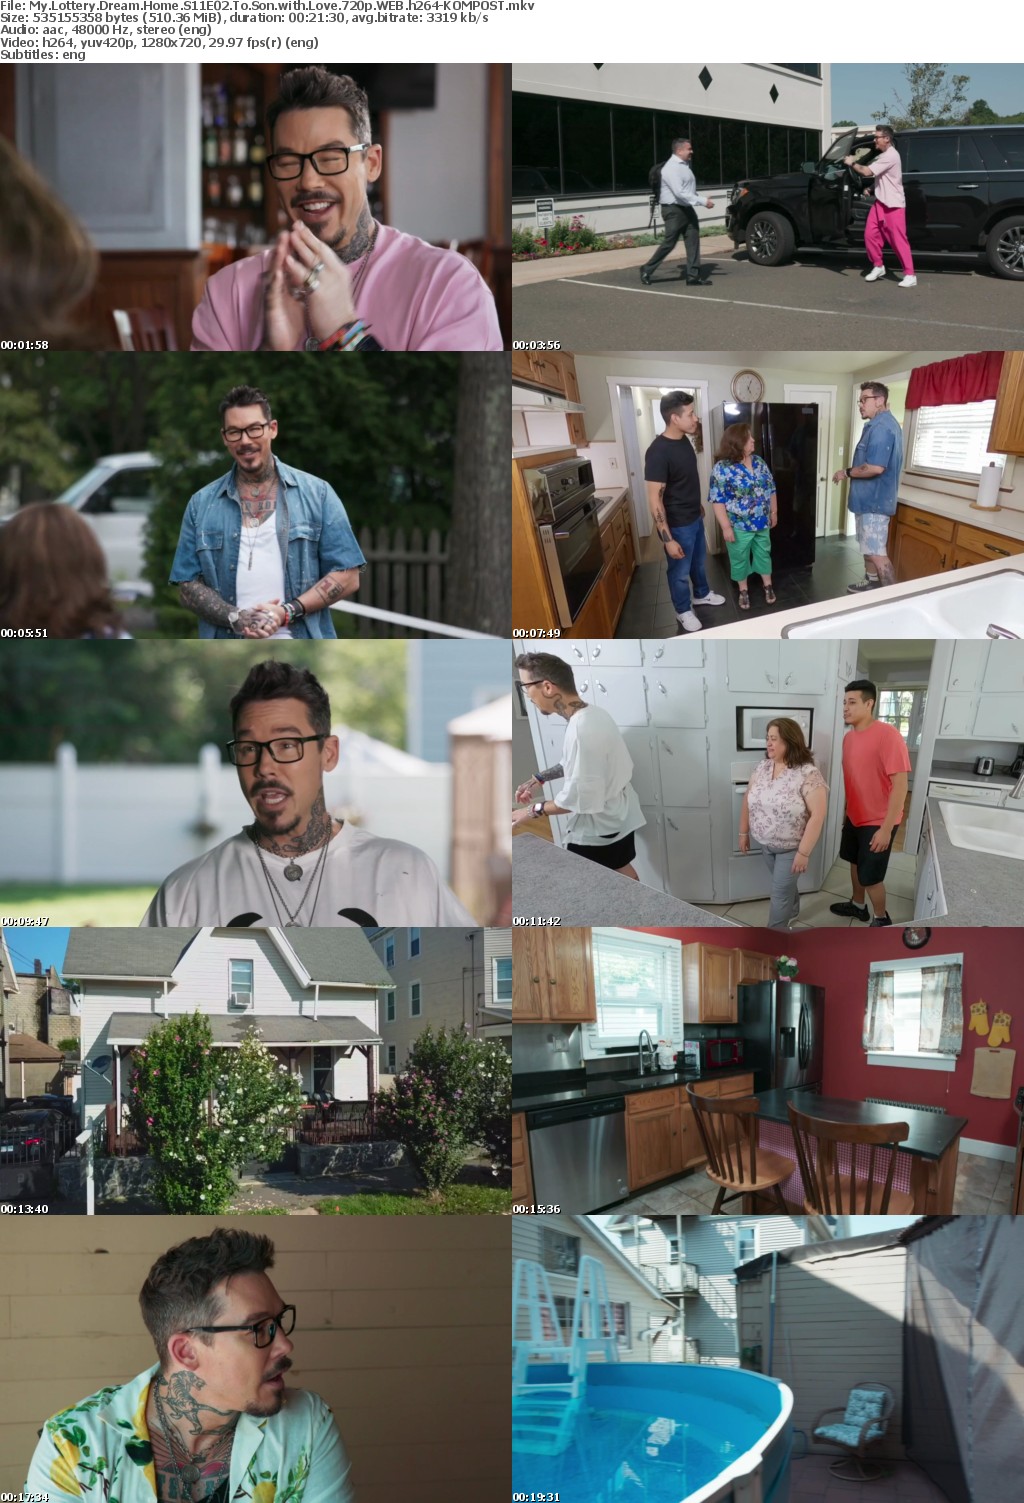 My Lottery Dream Home S11E02 To Son with Love 720p WEB h264-KOMPOST